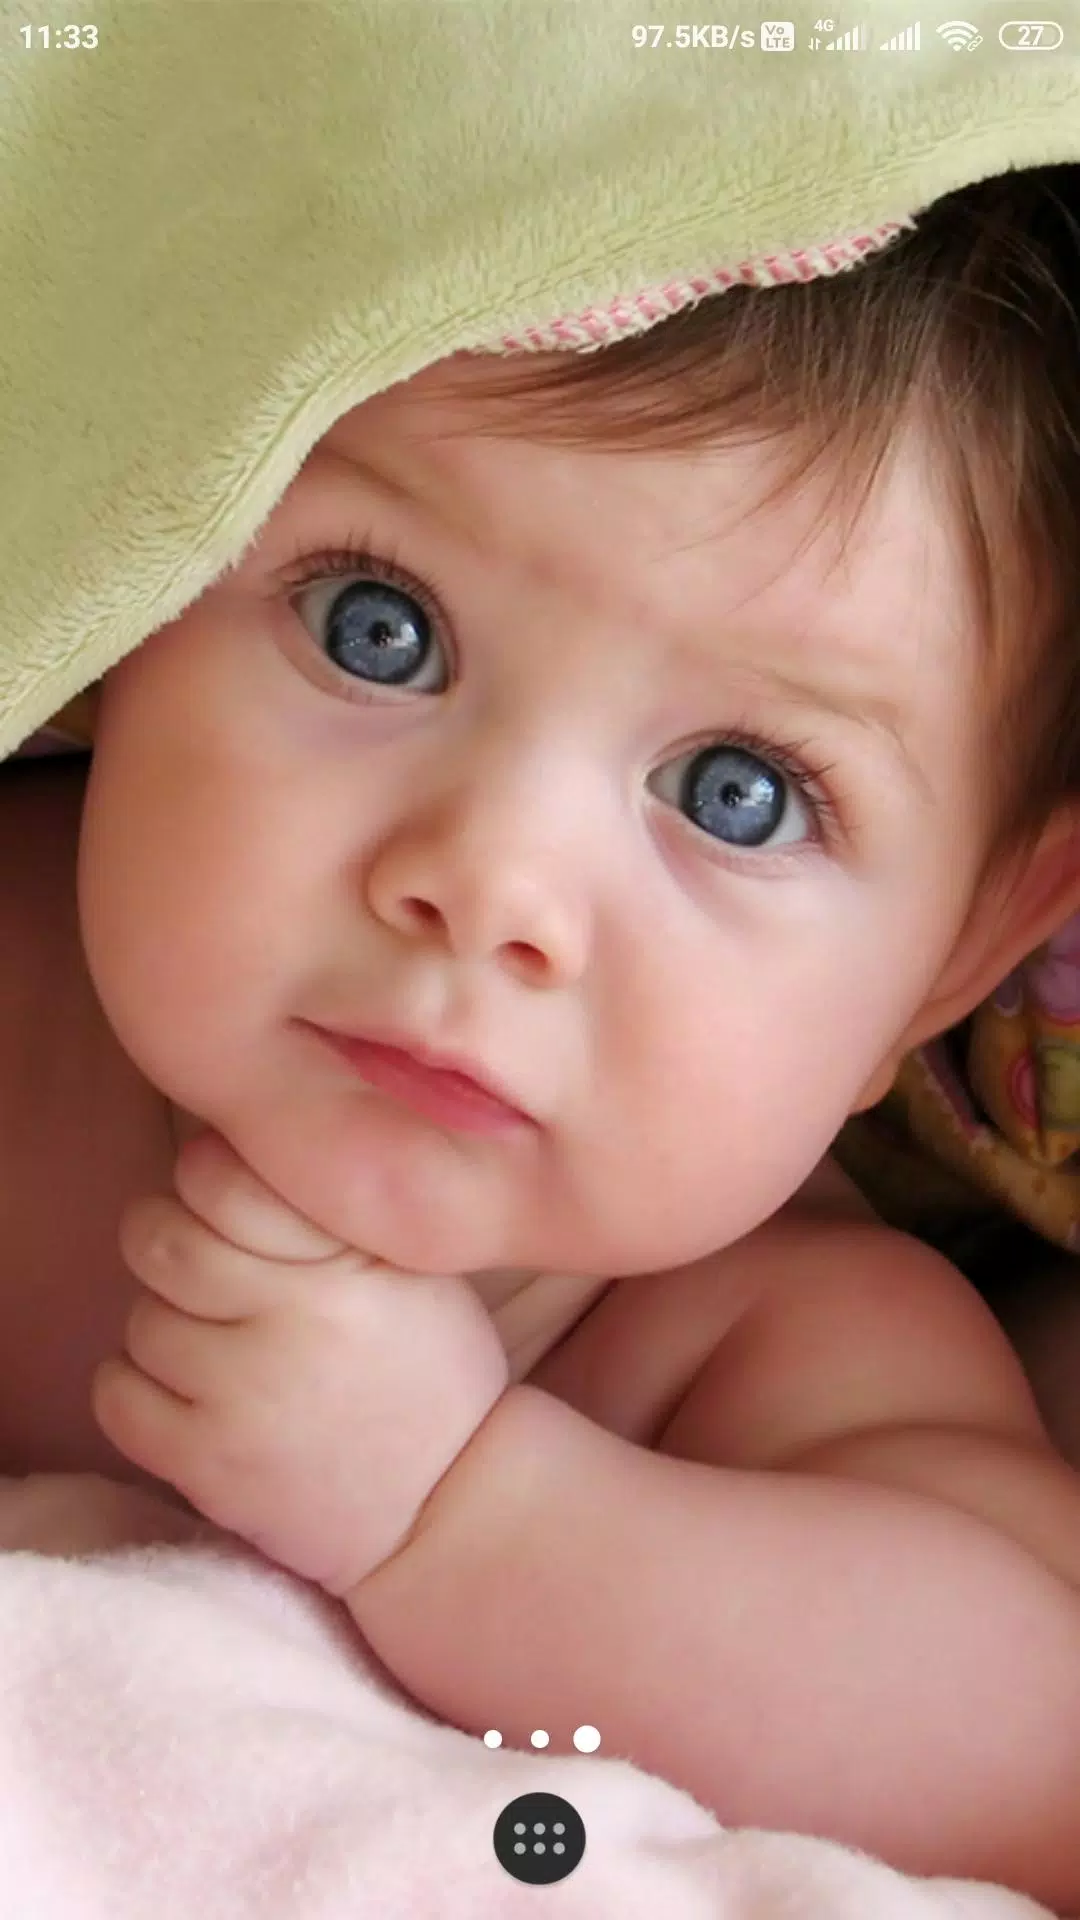 CUTE BABY Wallpaper HD APK for Android Download